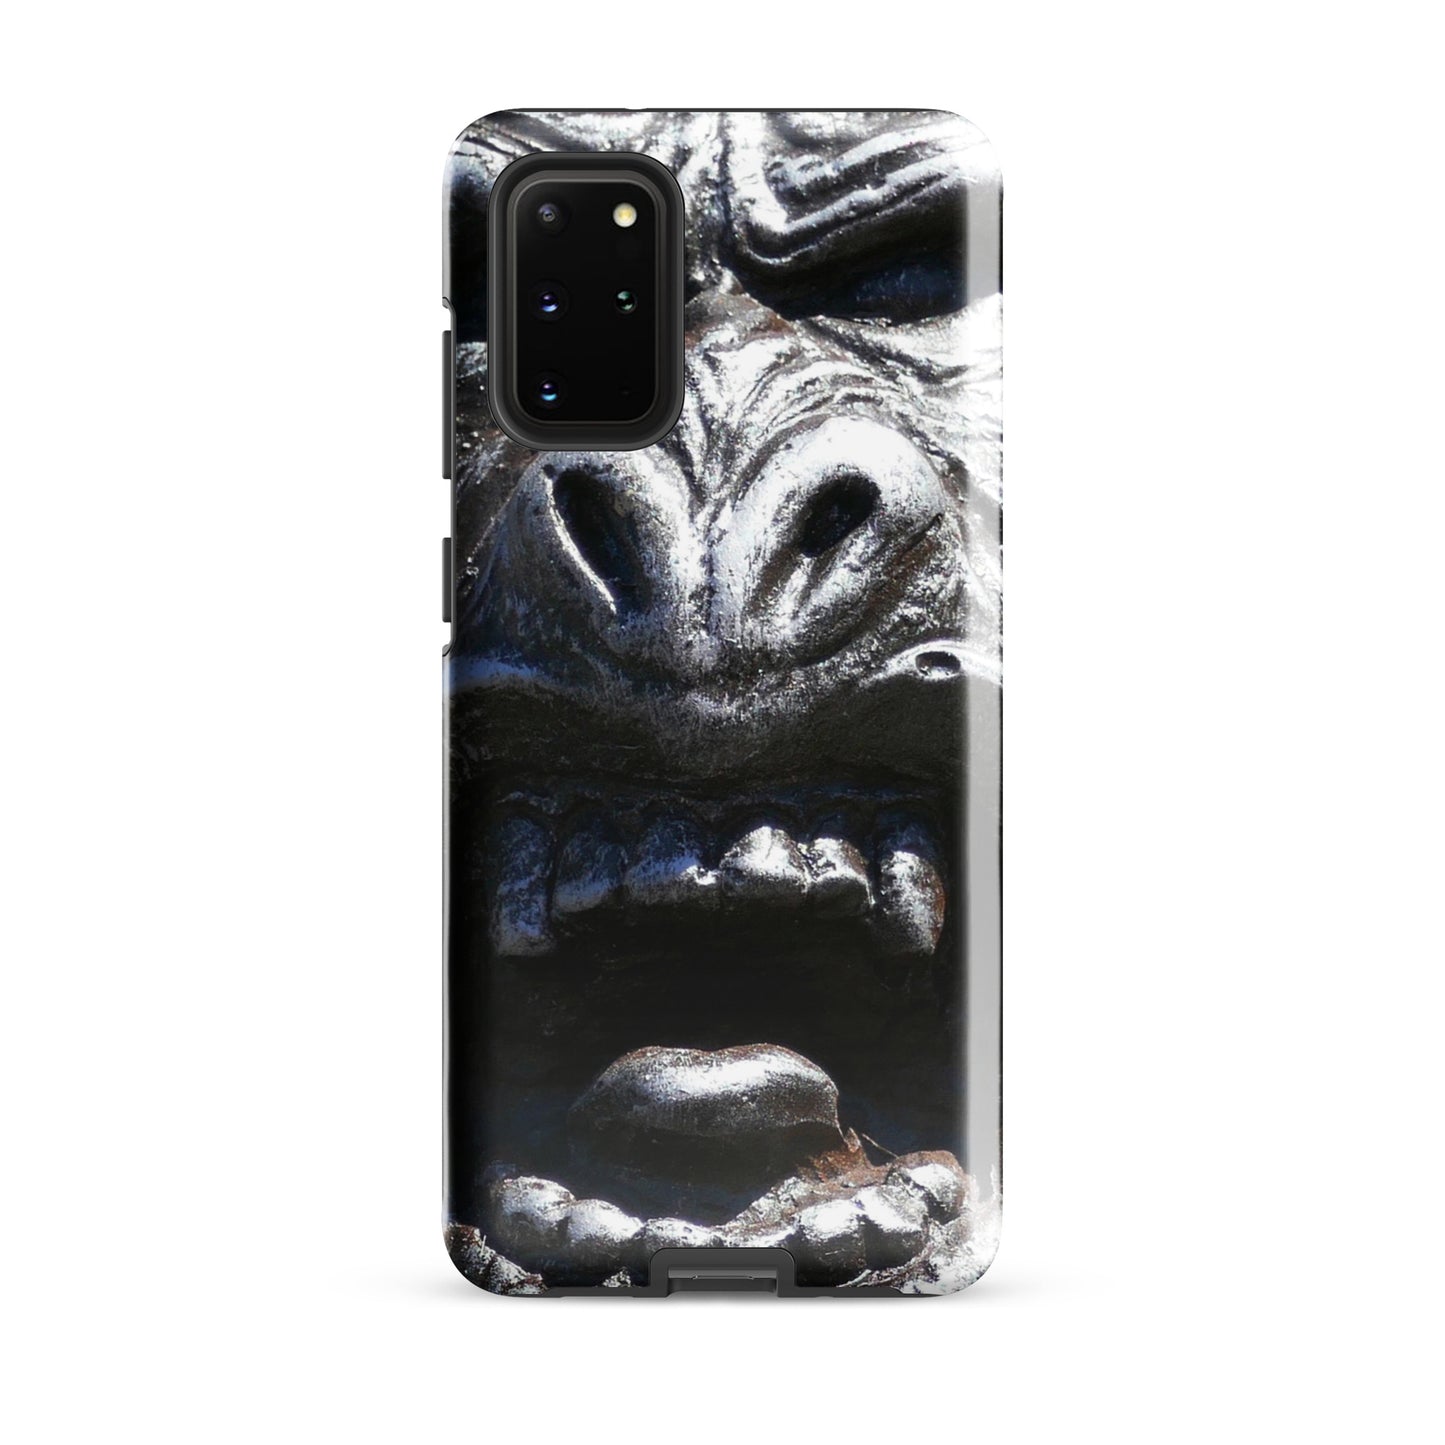 Frenzy Scream - Tough case for Samsung ( Galaxy S24 Ultra - Galaxy S10 ) - Fry1Productions